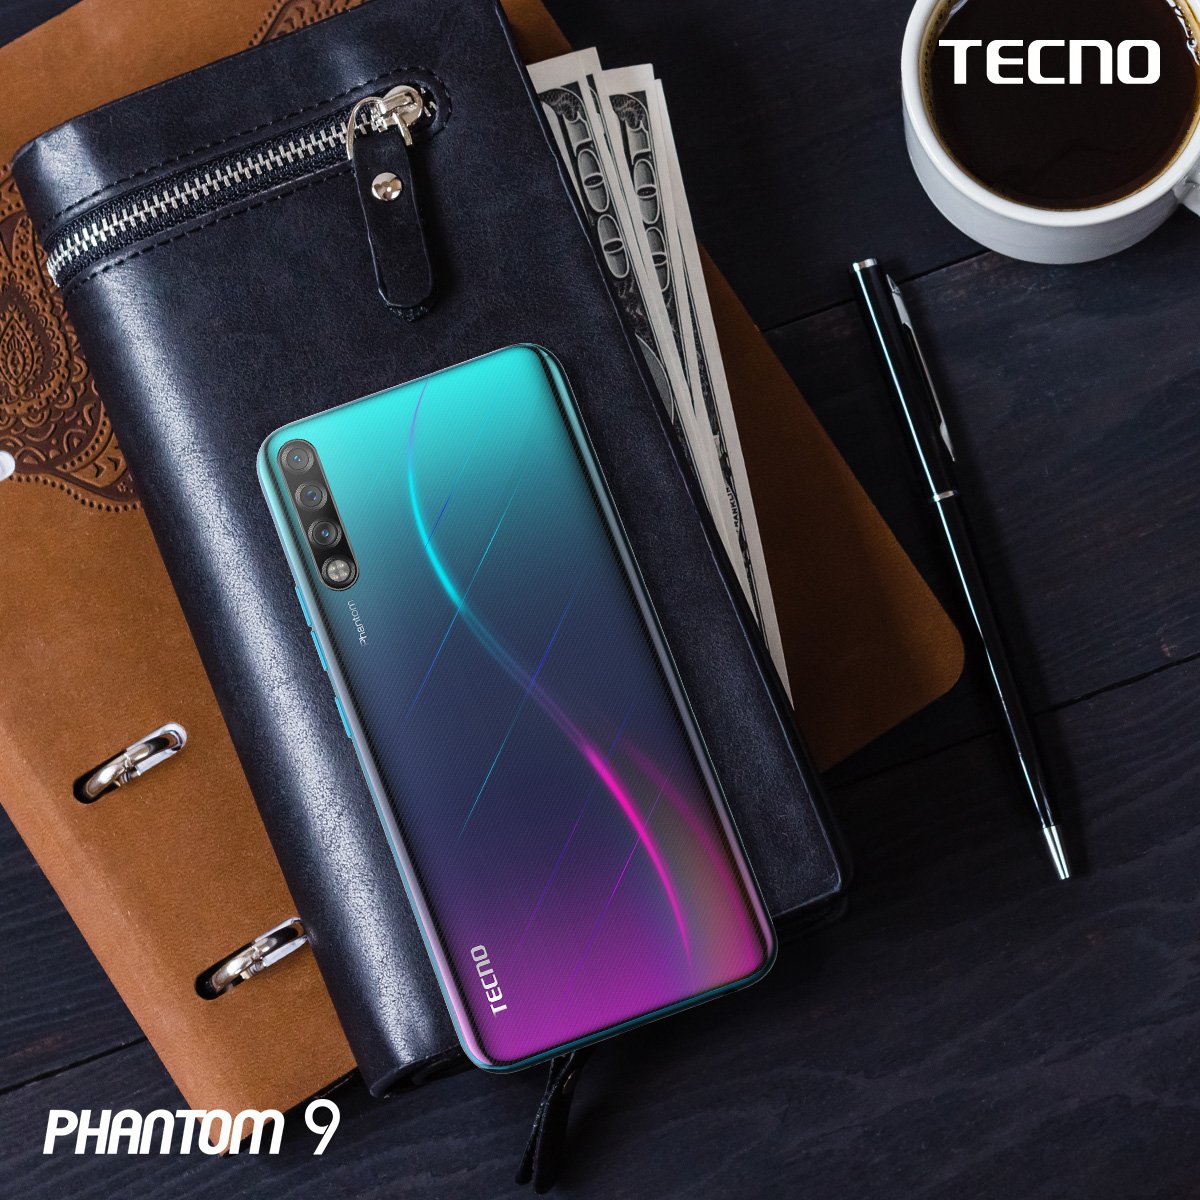 If you own it give it a RT
#phantom9inTz #unleashyourvision